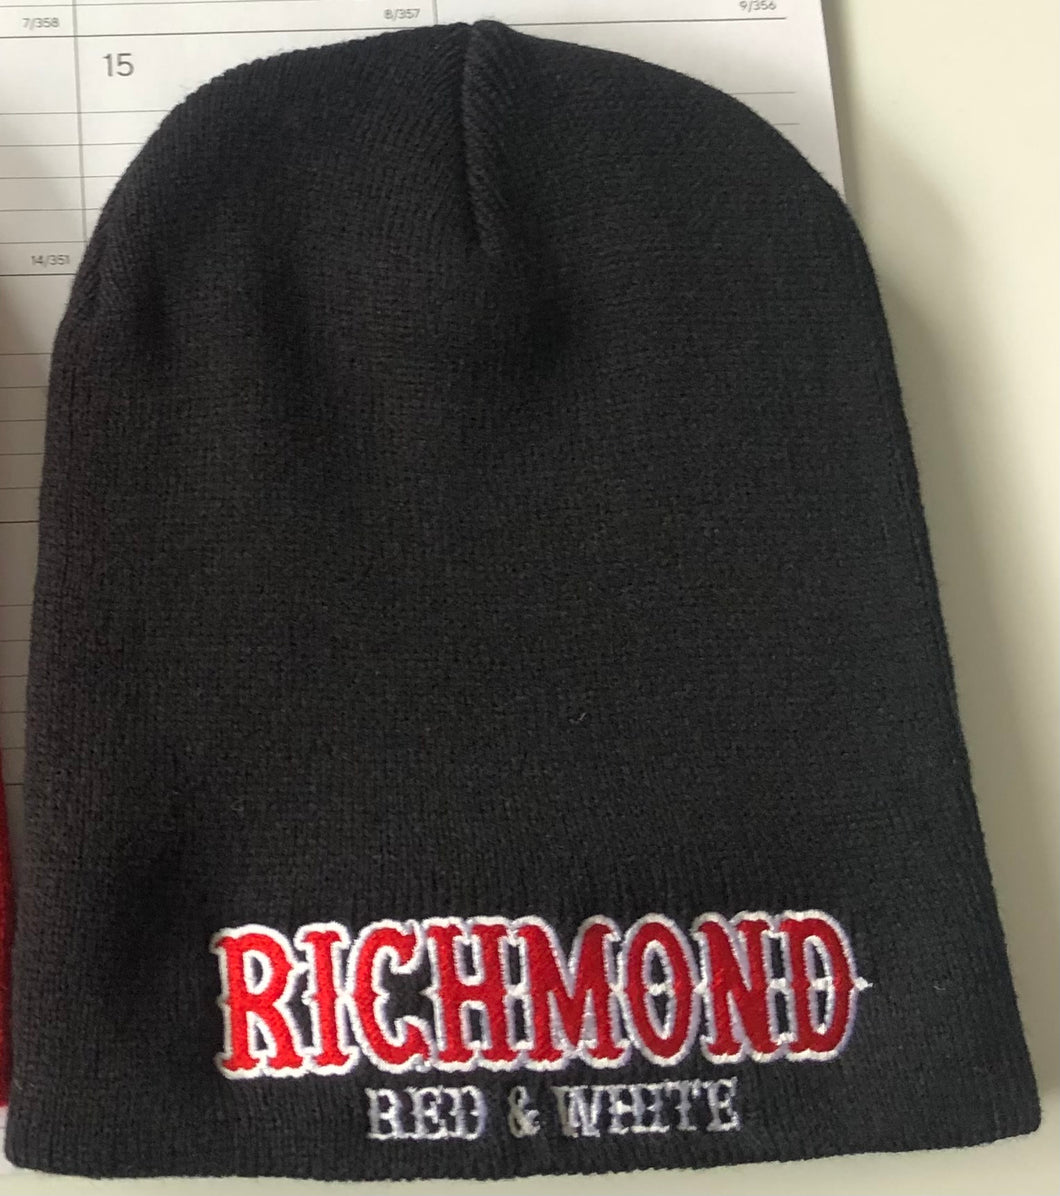 Black beanie with embroidered RICHMOND RED &WHITE on front